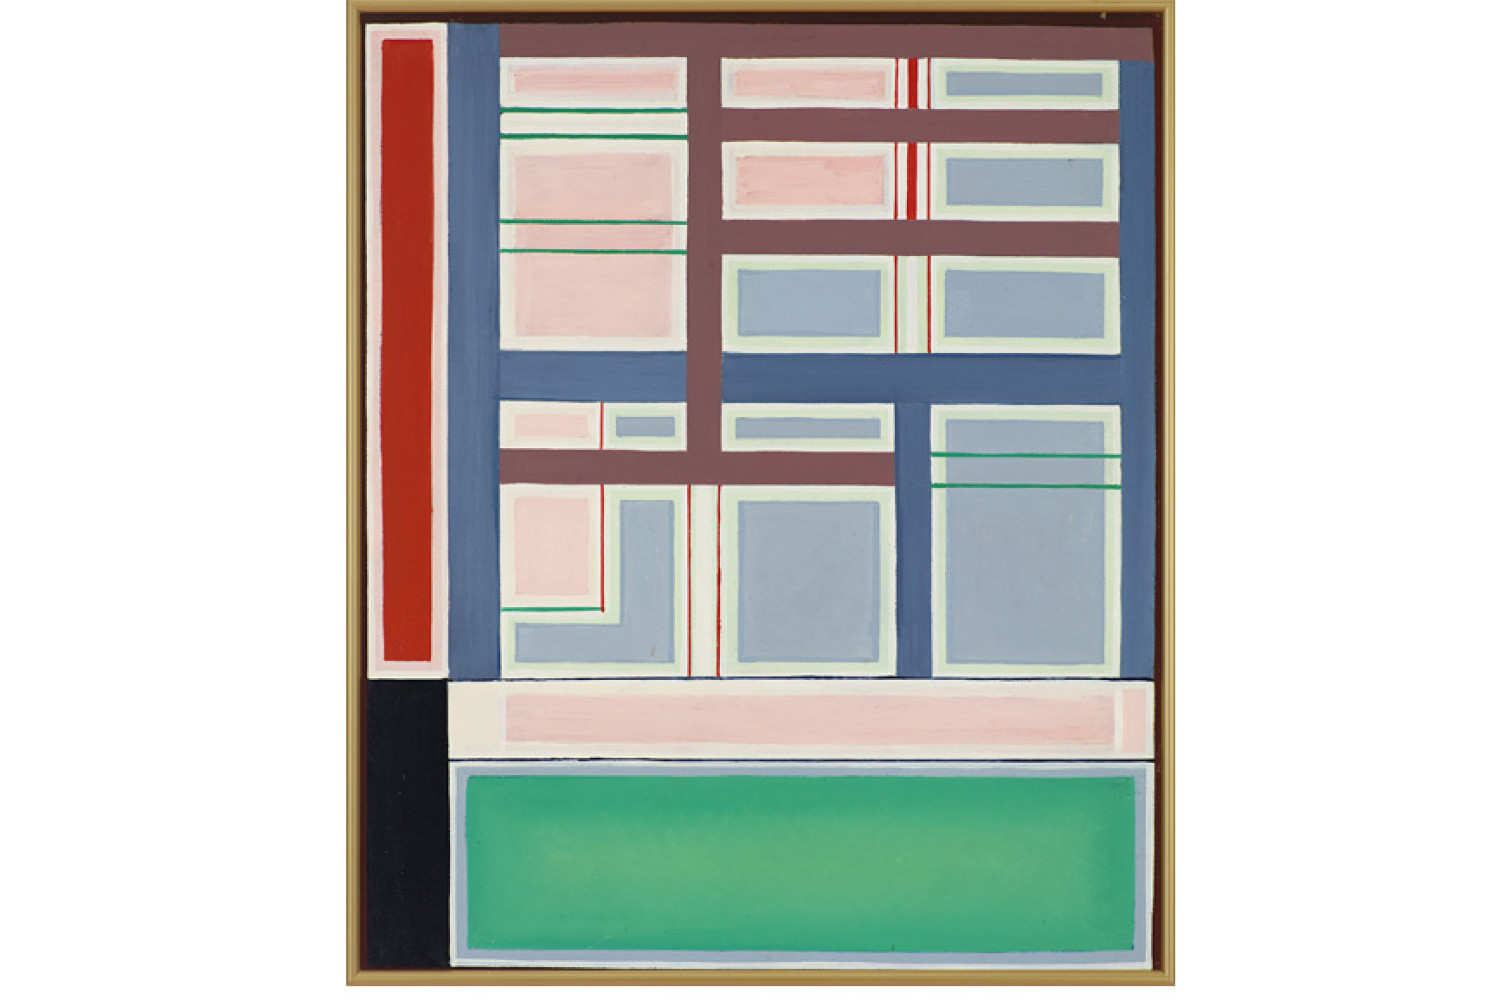 Étude No. 1 Analise, 1945-1965, by Pierre Daura (Spanish, 1896-1976); oil on canvas; 30 1/2 x 25 1/2 inches; Courtesy of the Lowe Art Museum, University of Miami. © Lowe Art Museum, University of Miami